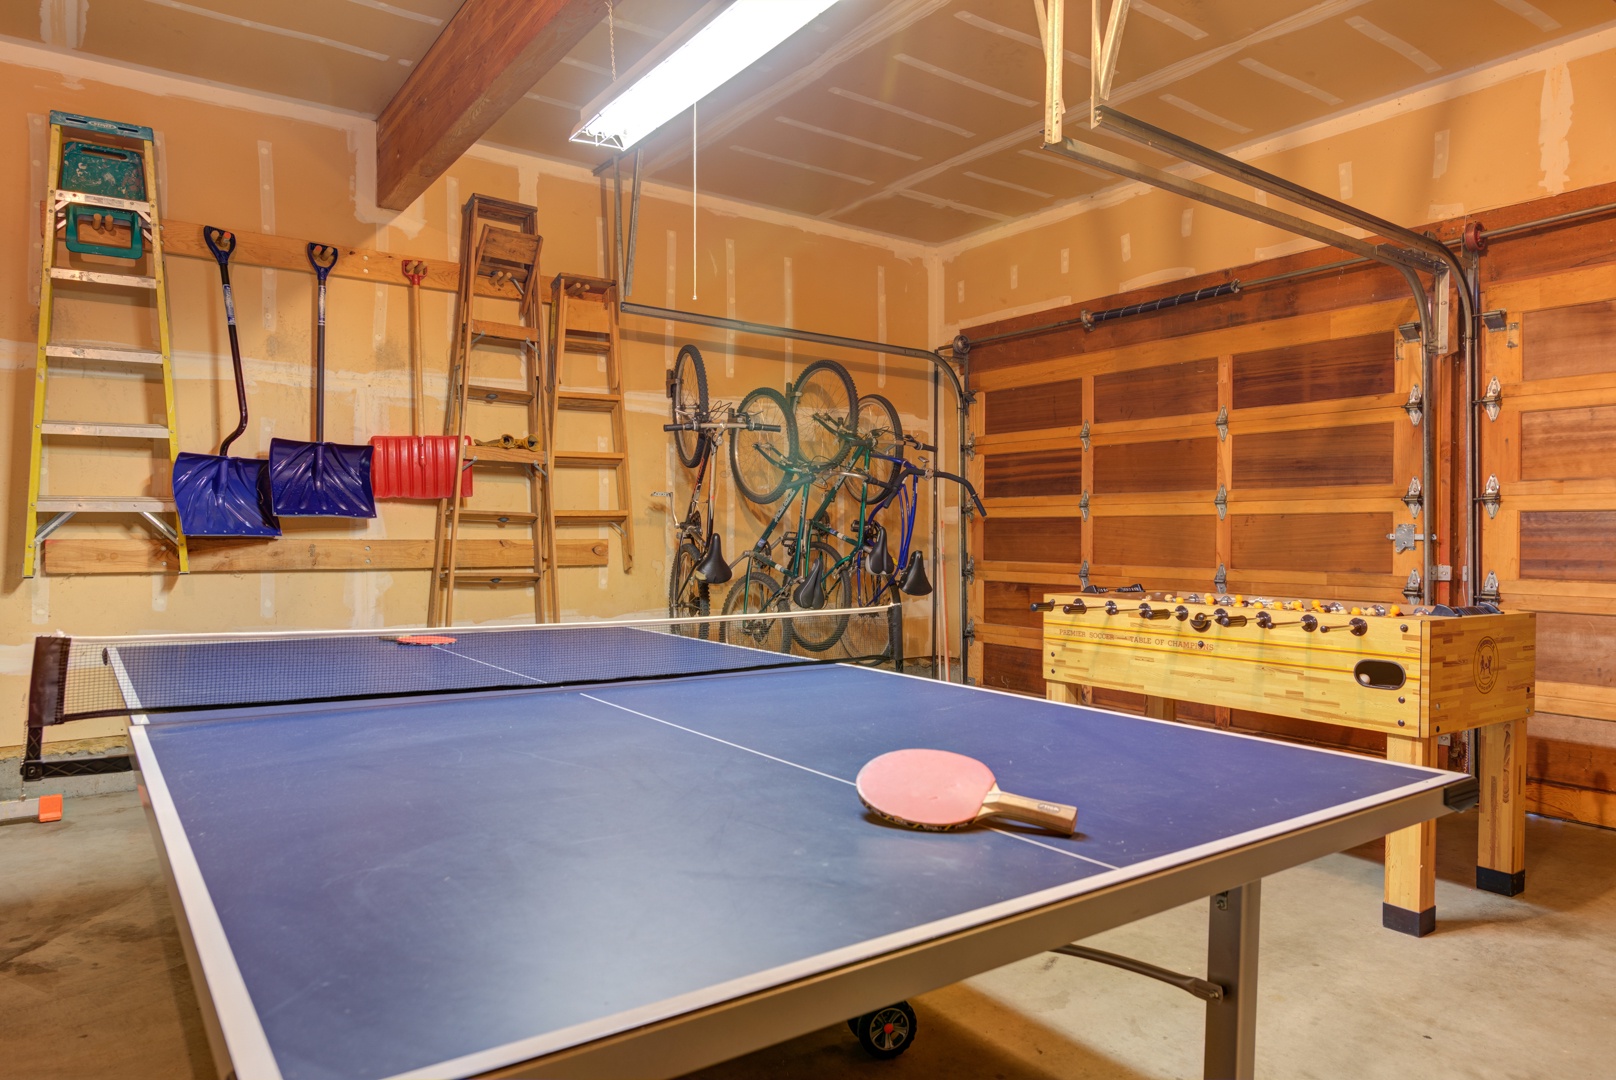 Ping pong table, foosball and bikes available for guest use in garage